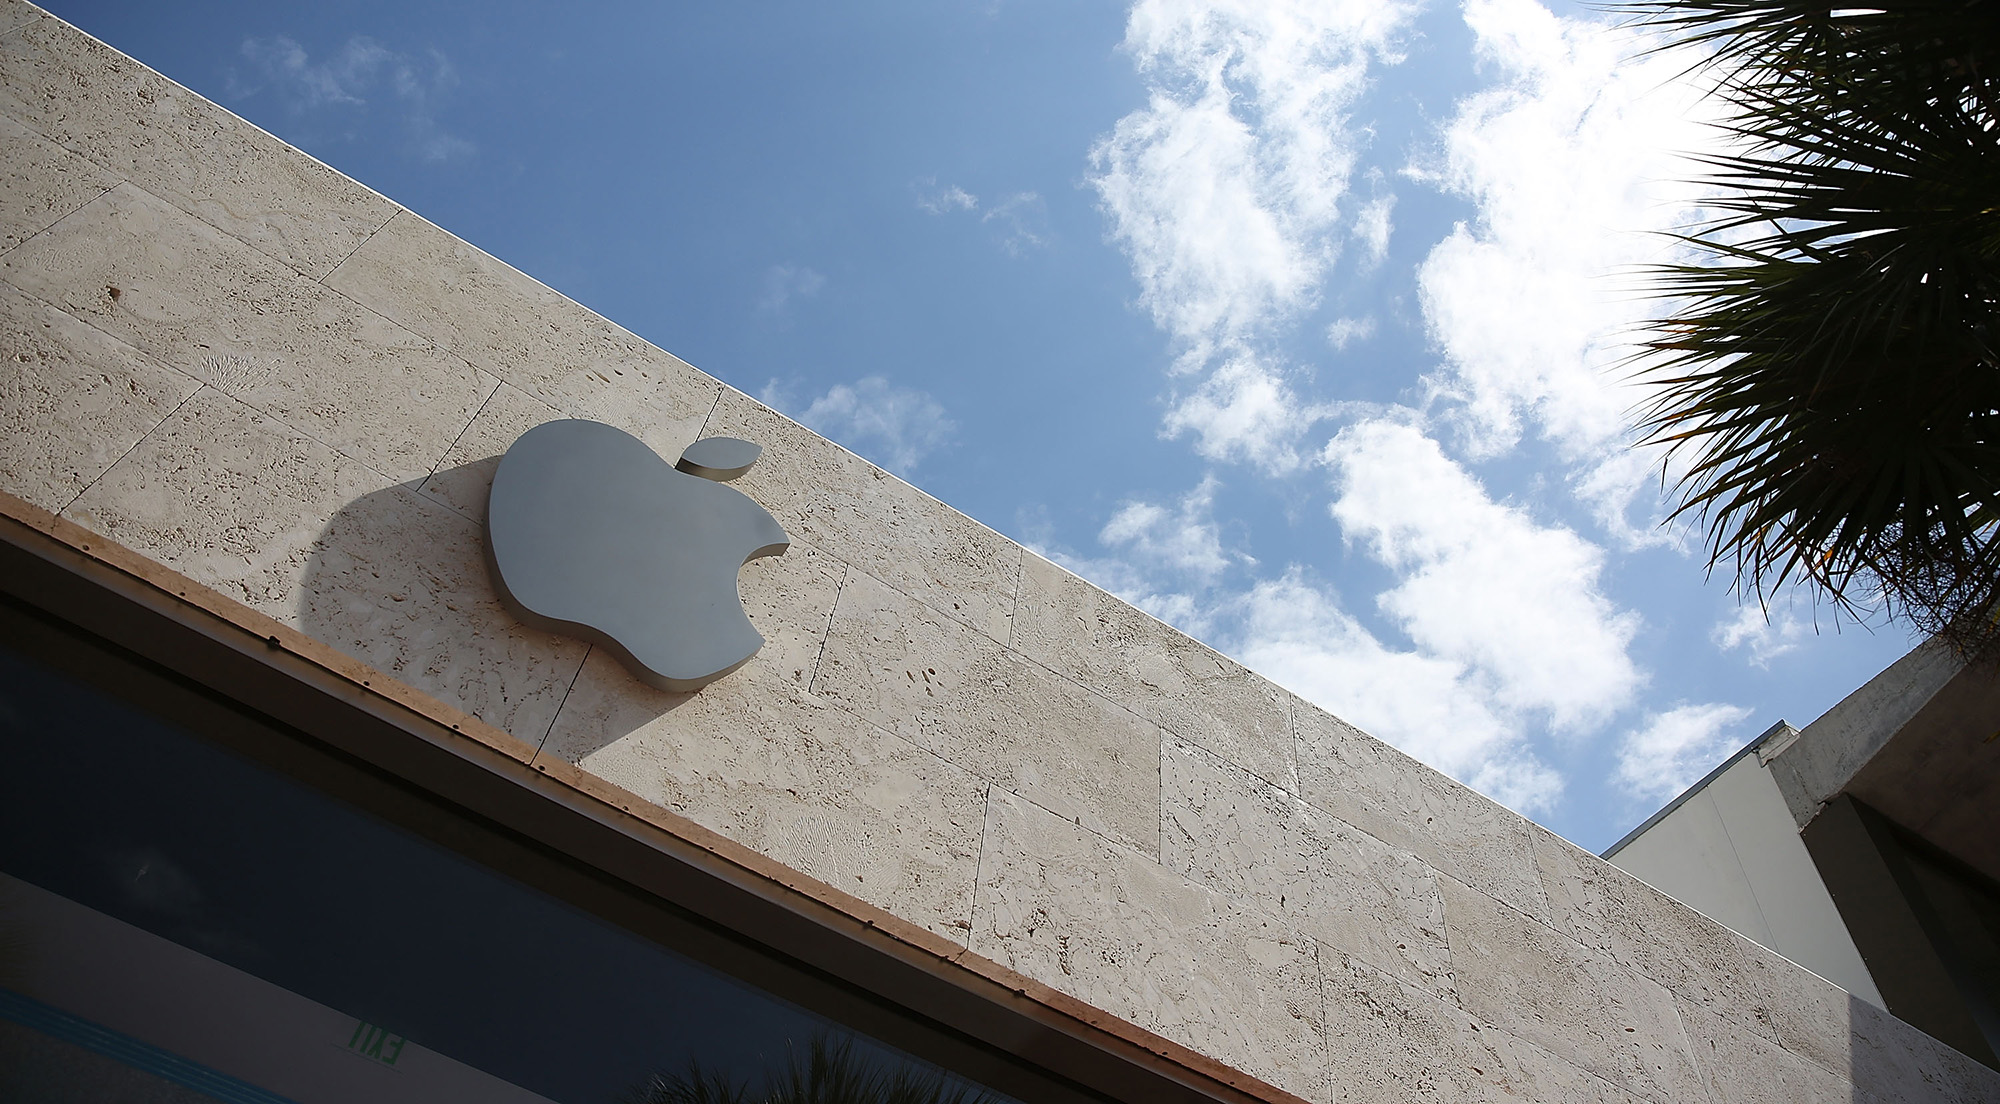 Apple Shuts 10% of U.S. Stores Again on Virus With 14 in Florida - Bloomberg